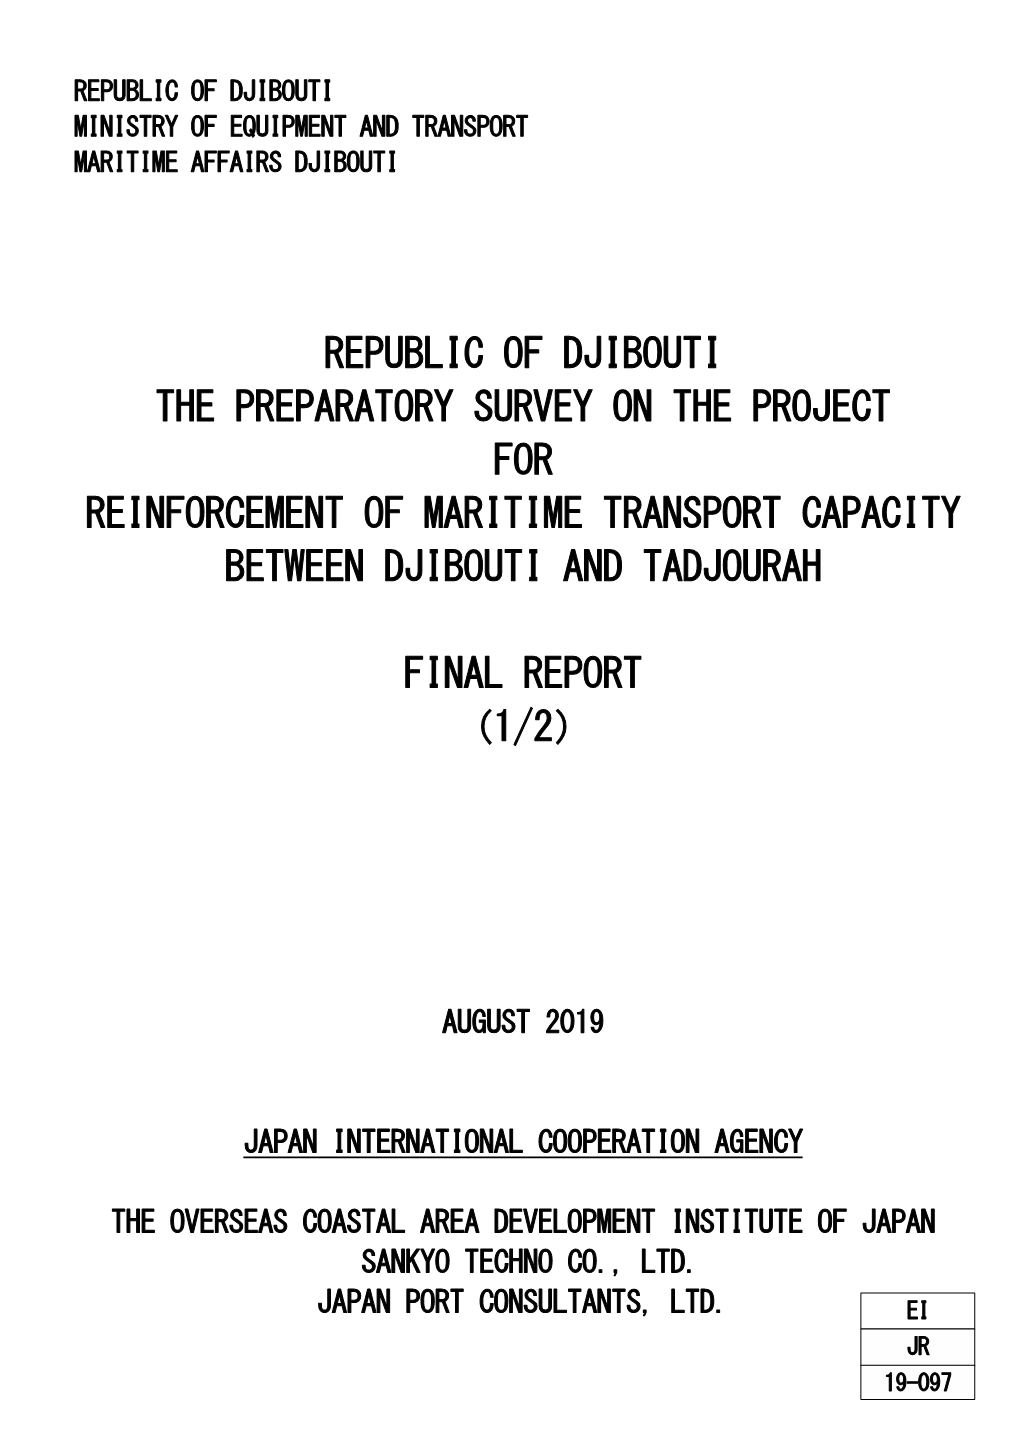 Republic of Djibouti the Preparatory Survey on the Project for Reinforcement of Maritime Transport Capacity Between Djibouti and Tadjourah